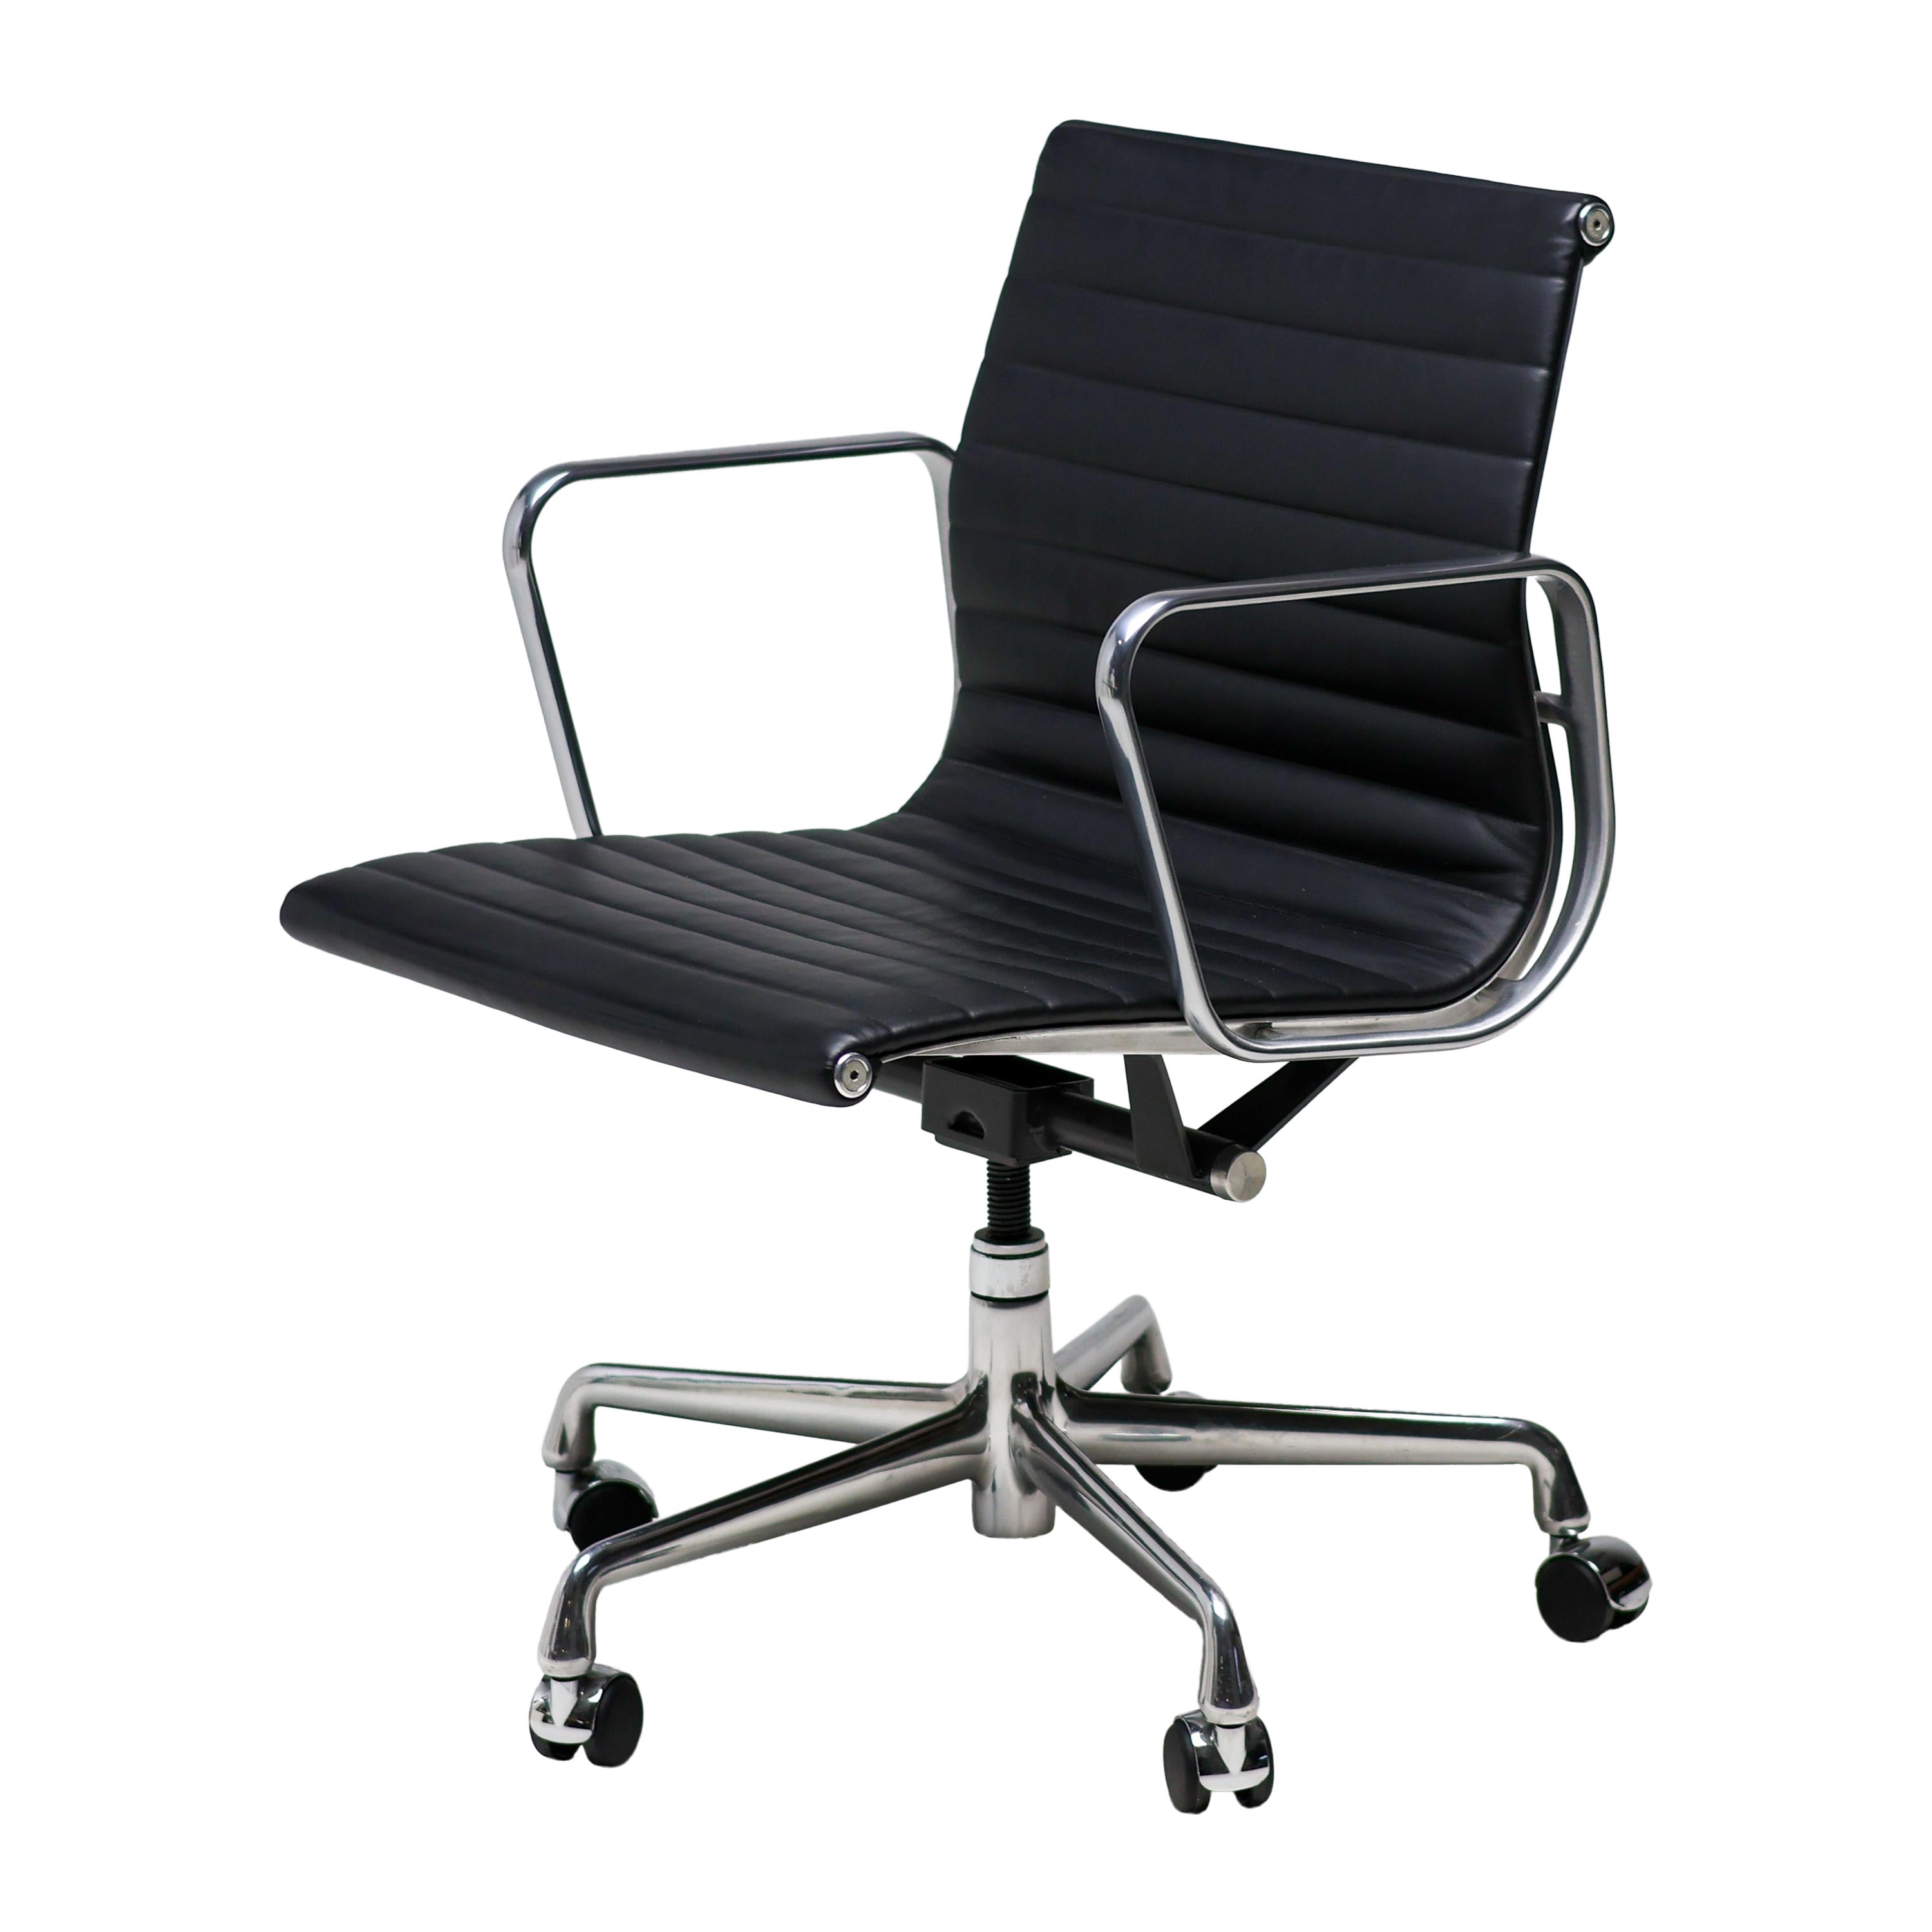 Charles & Ray Eames EA117 Black Leather Executive Desk Chairs by Herman Miller